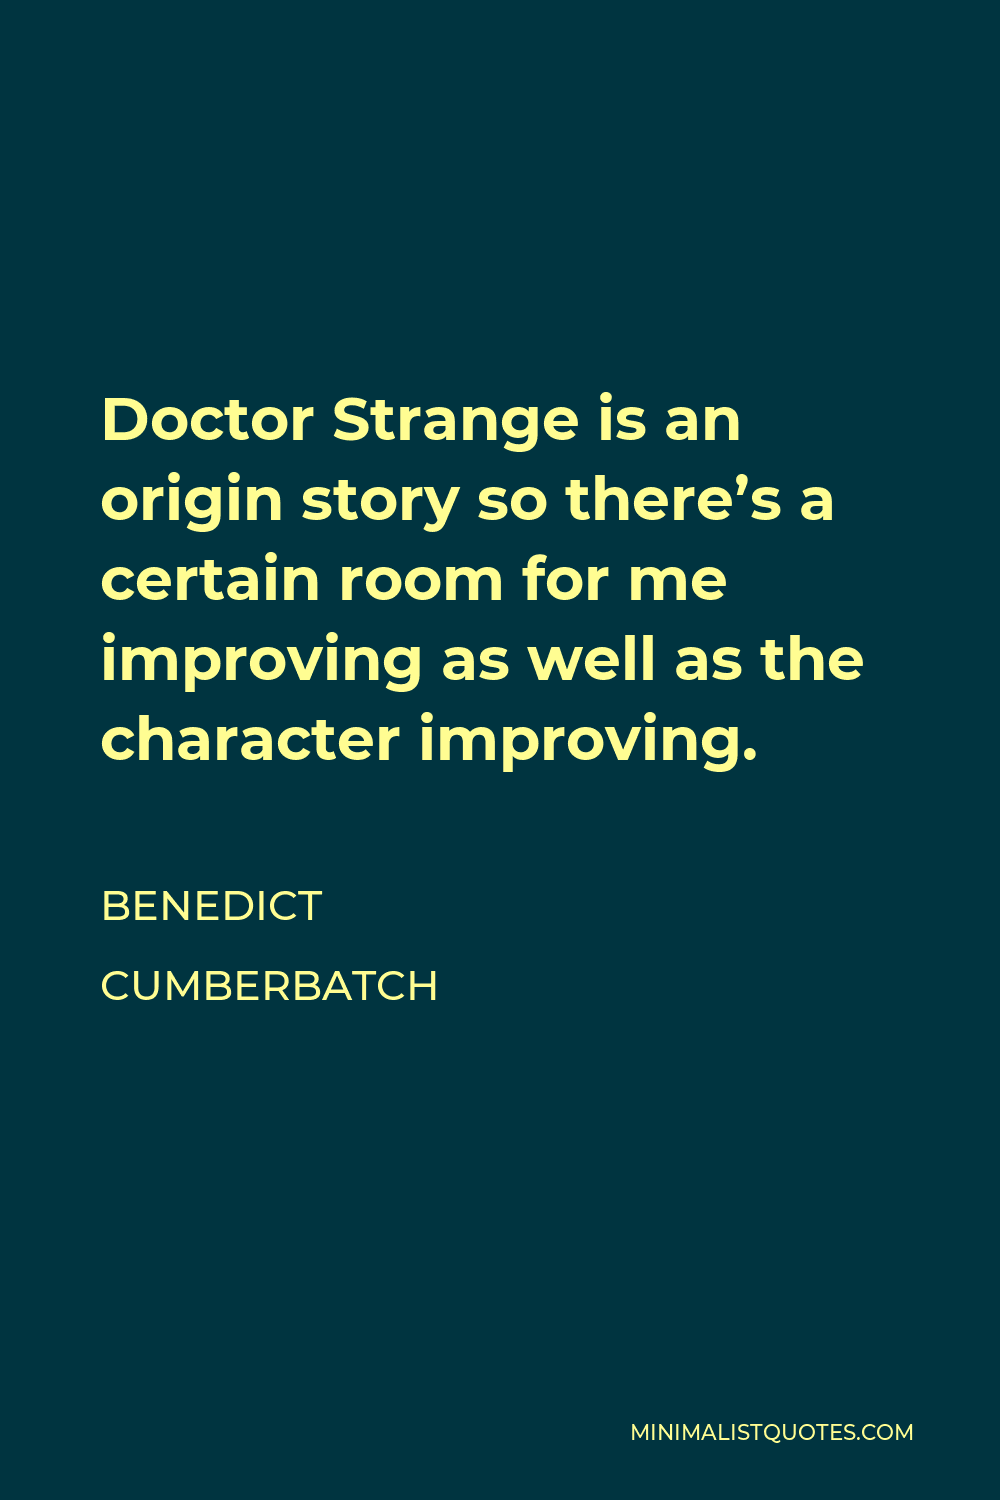 Benedict Cumberbatch Quote - Doctor Strange is an origin story so there’s a certain room for me improving as well as the character improving.